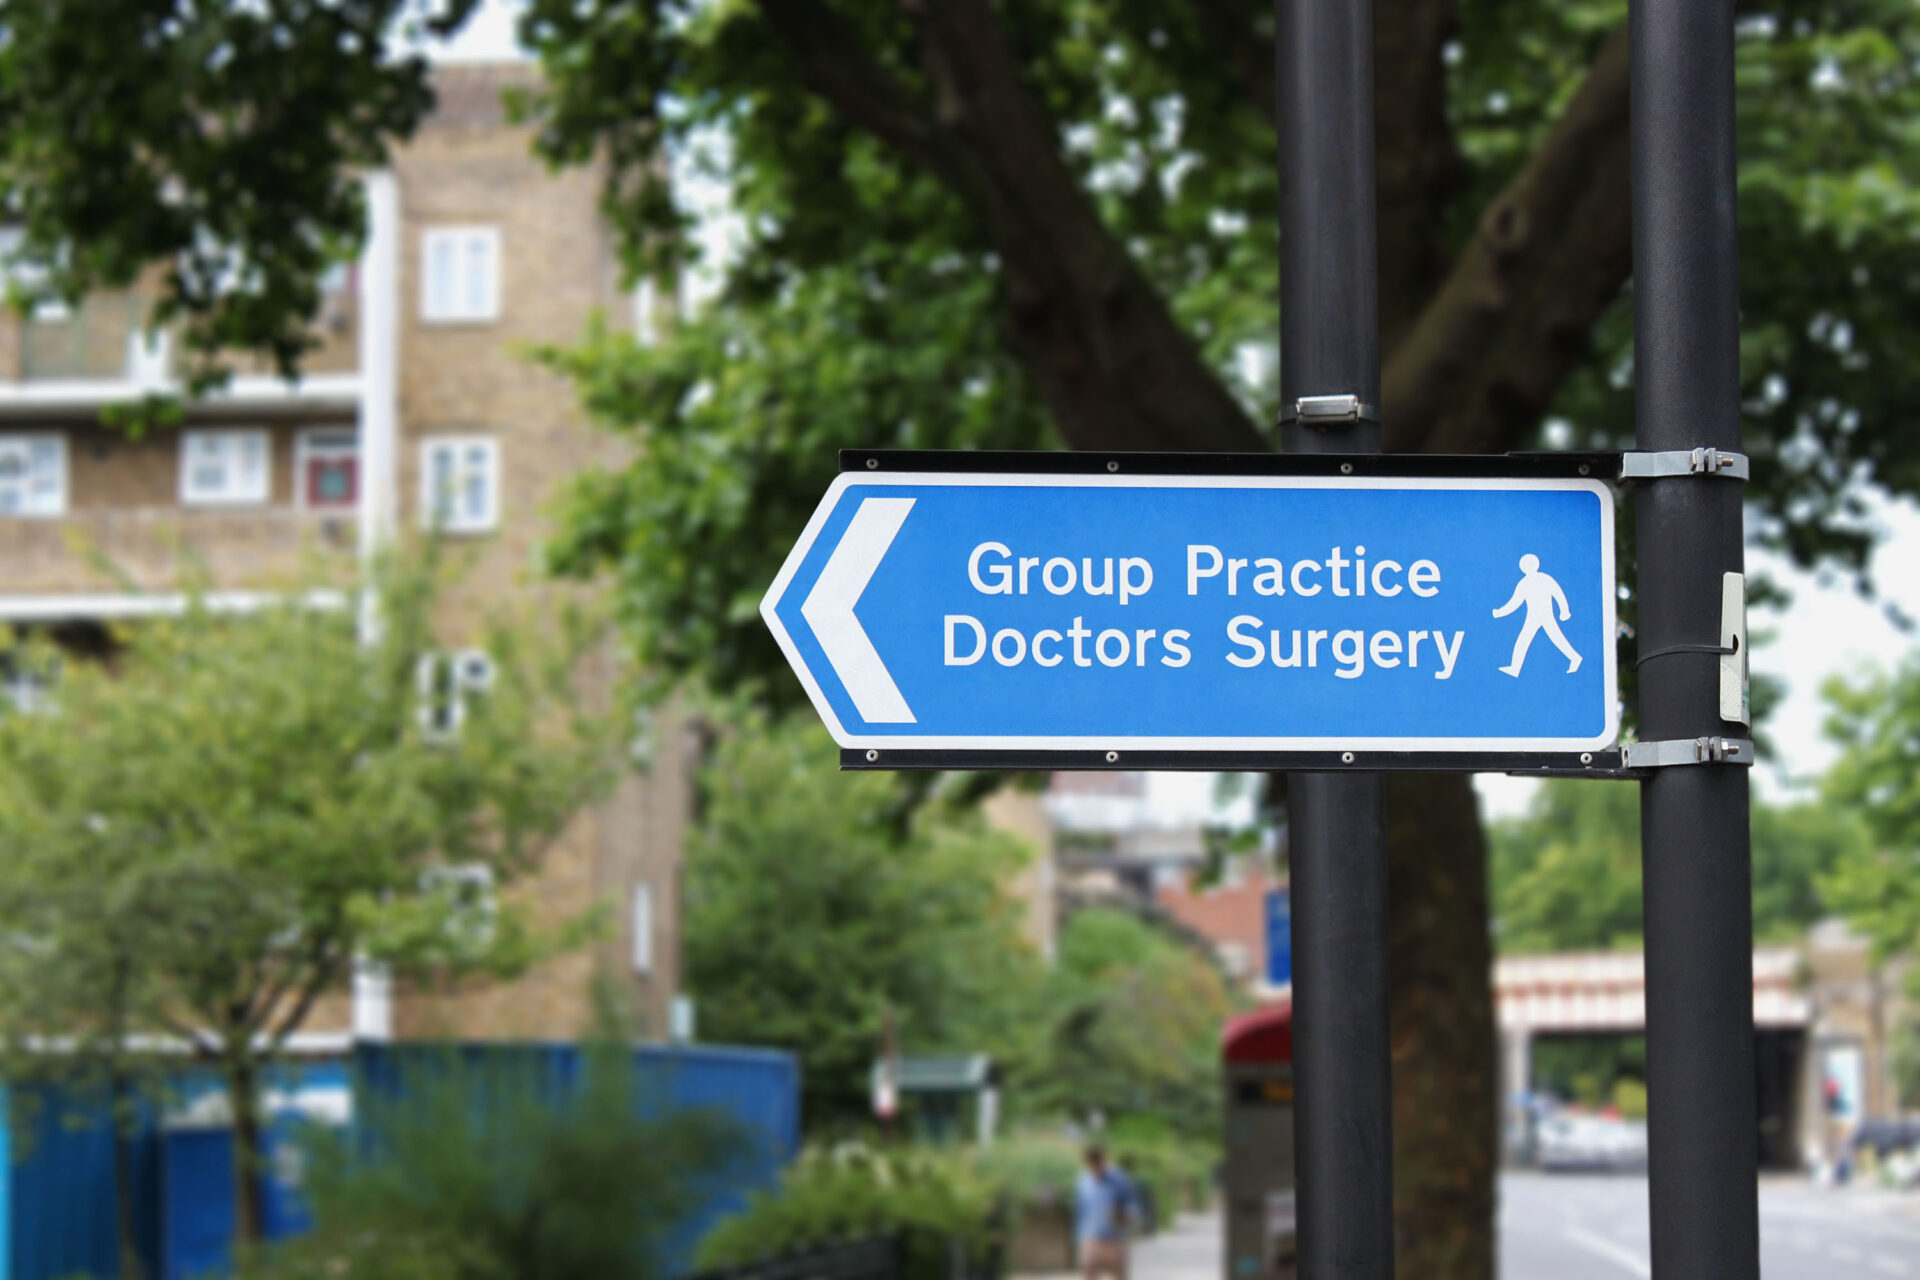 "Group practice Doctors Surgery Sign" on street